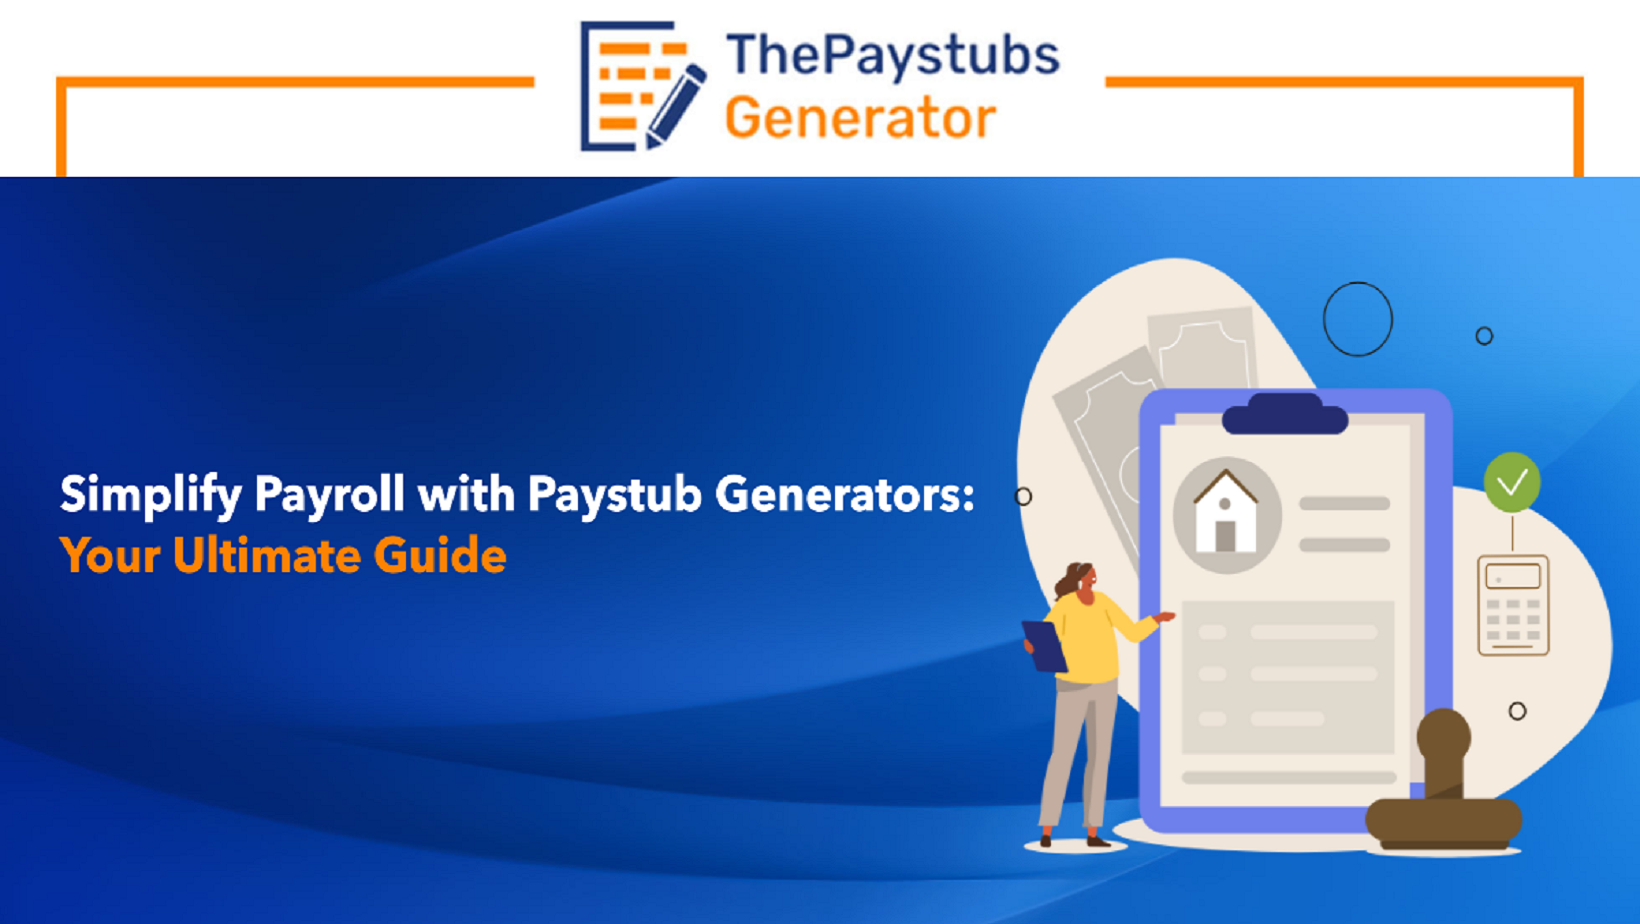 Simplify Payroll with Paystub Generators: Your Ultimate Guide